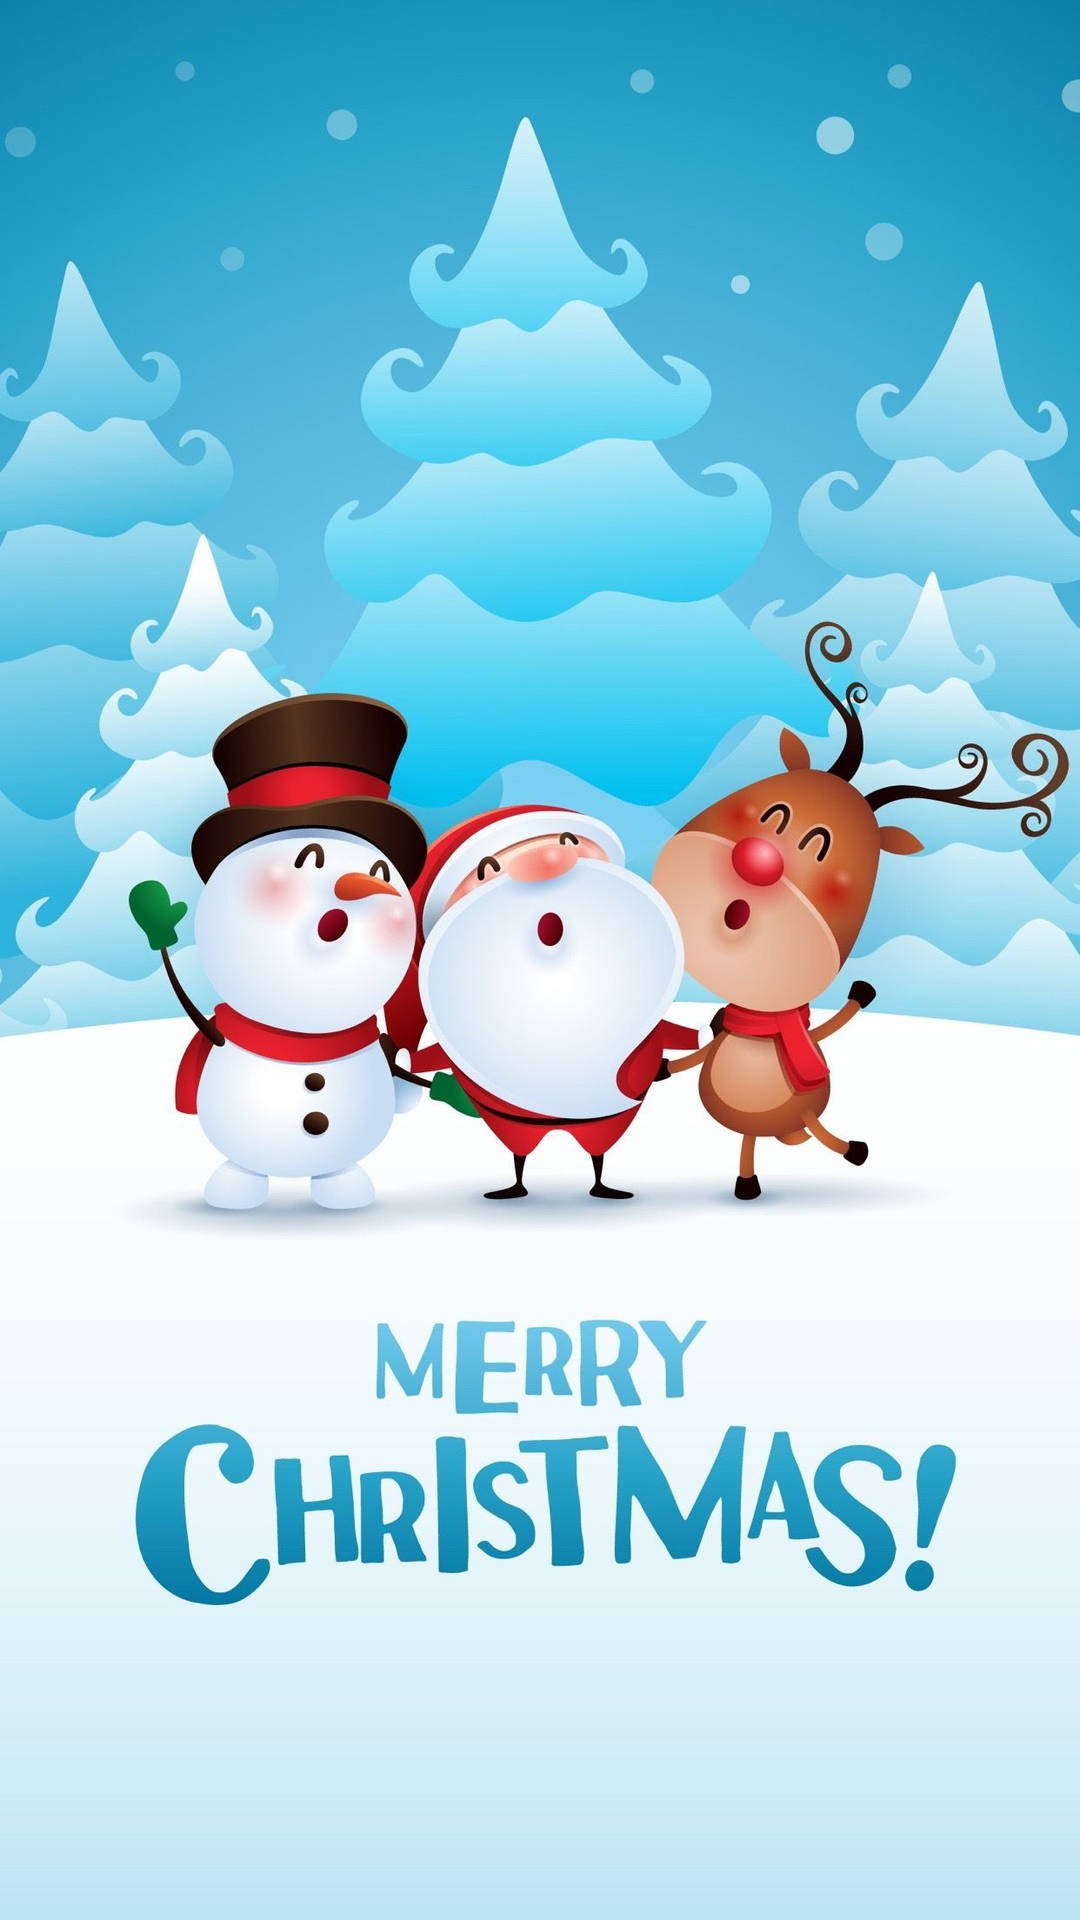 Merry Christmas Background Images  Free Download on Freepik